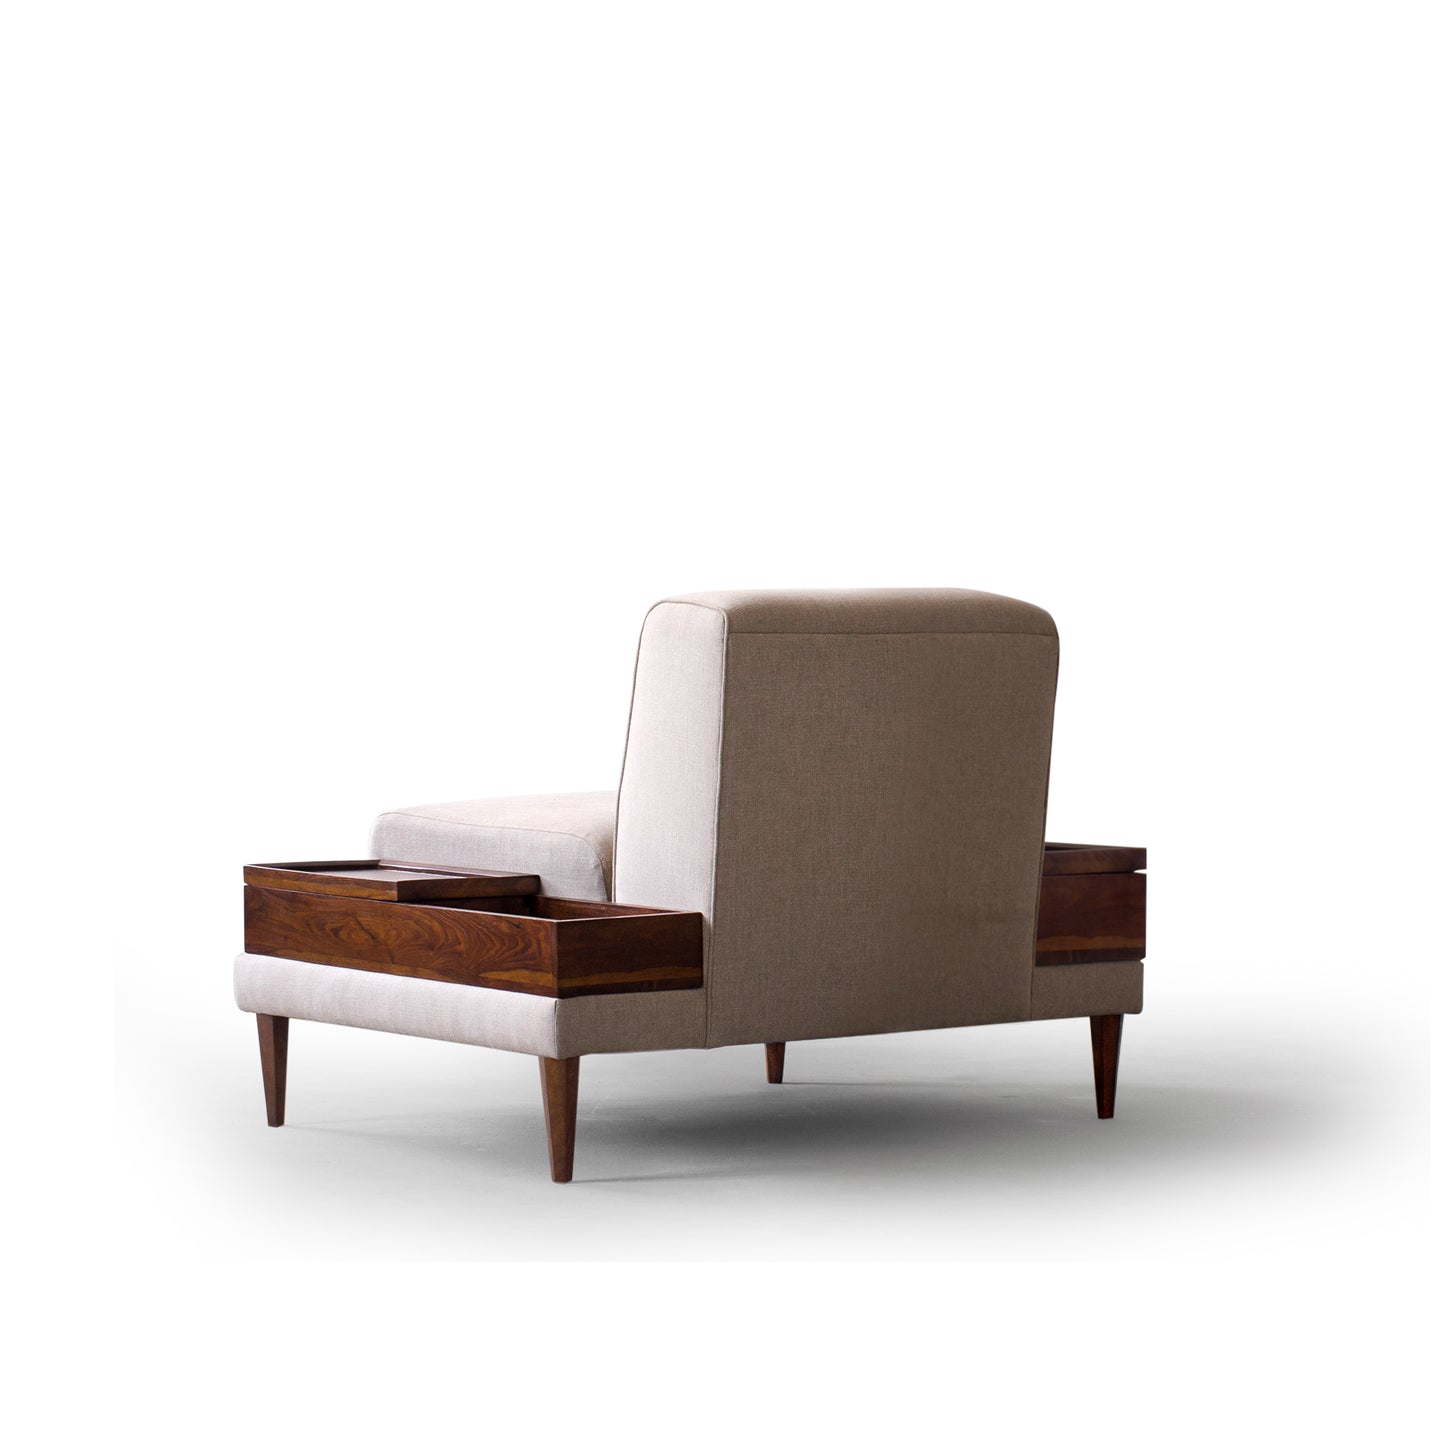 Lotus with Chute Sofa Collection